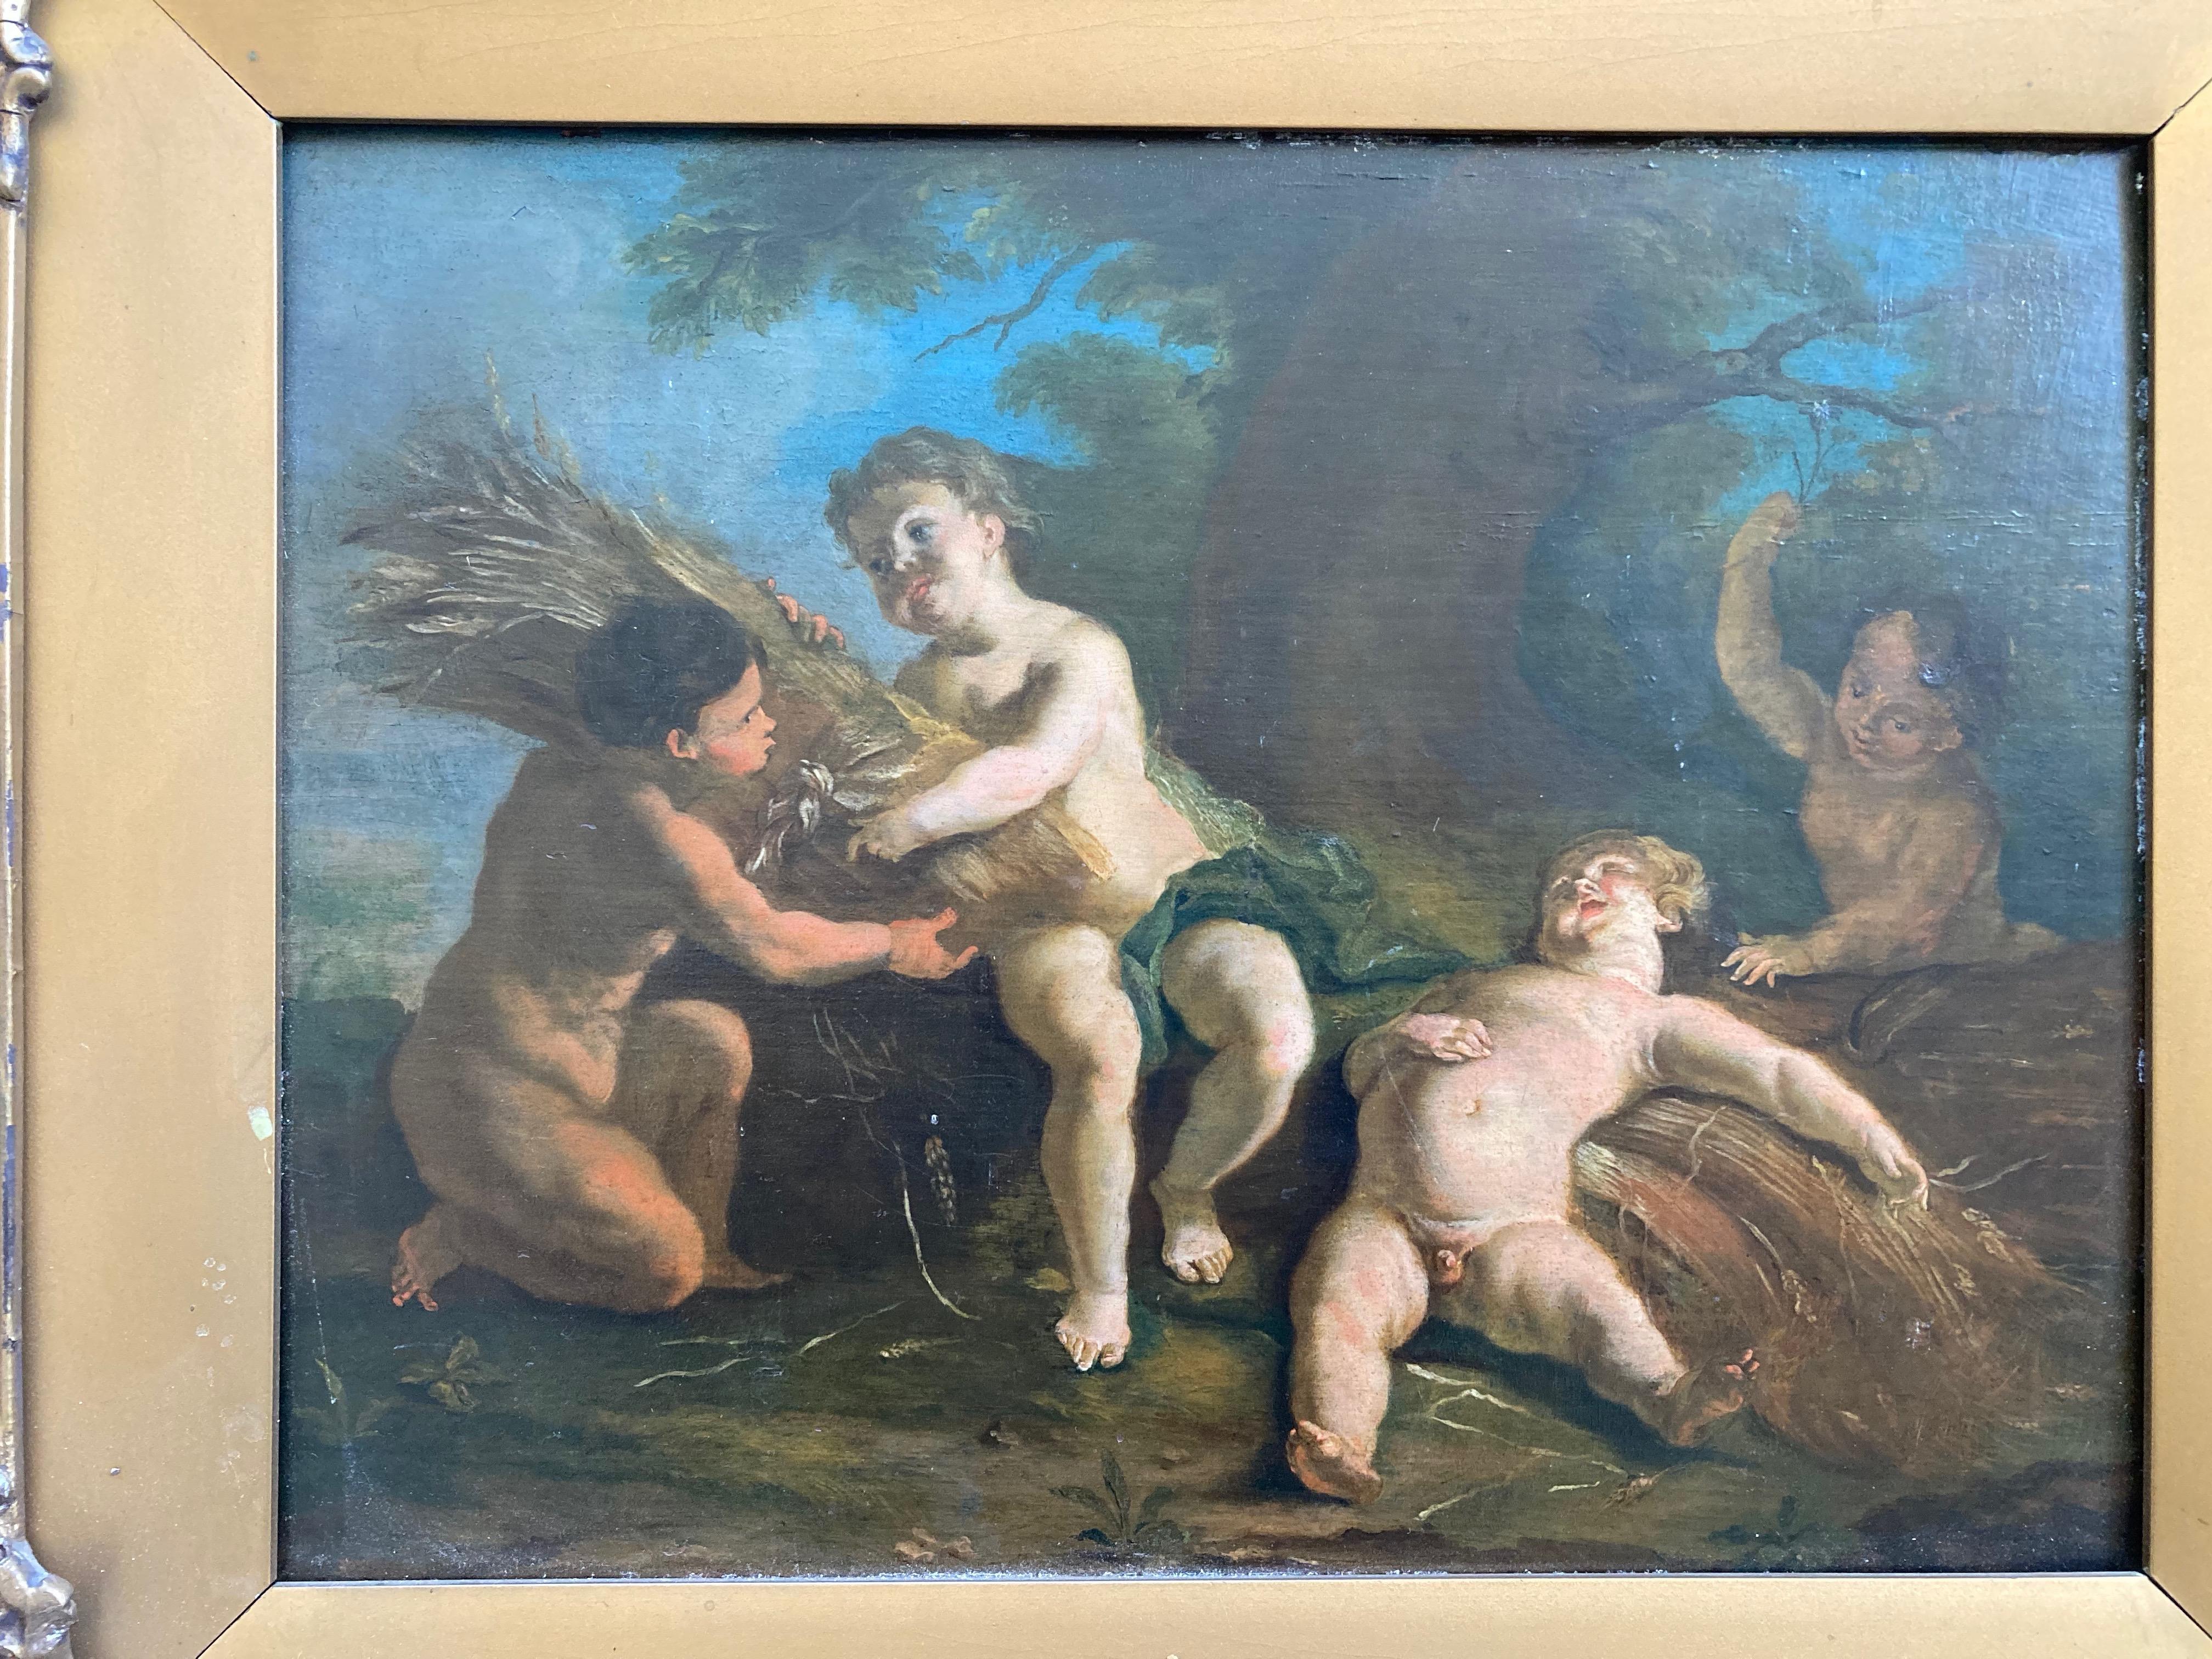 A charming image of cherubs cavorting with sheaths of wheat in a woodland setting.

Follower of Jean-Honoré Fragonard
Cherubs cavorting before a tree
Oil on panel
10¾ x 14 inches excluding the frame
16½ x 19½ inches with the frame